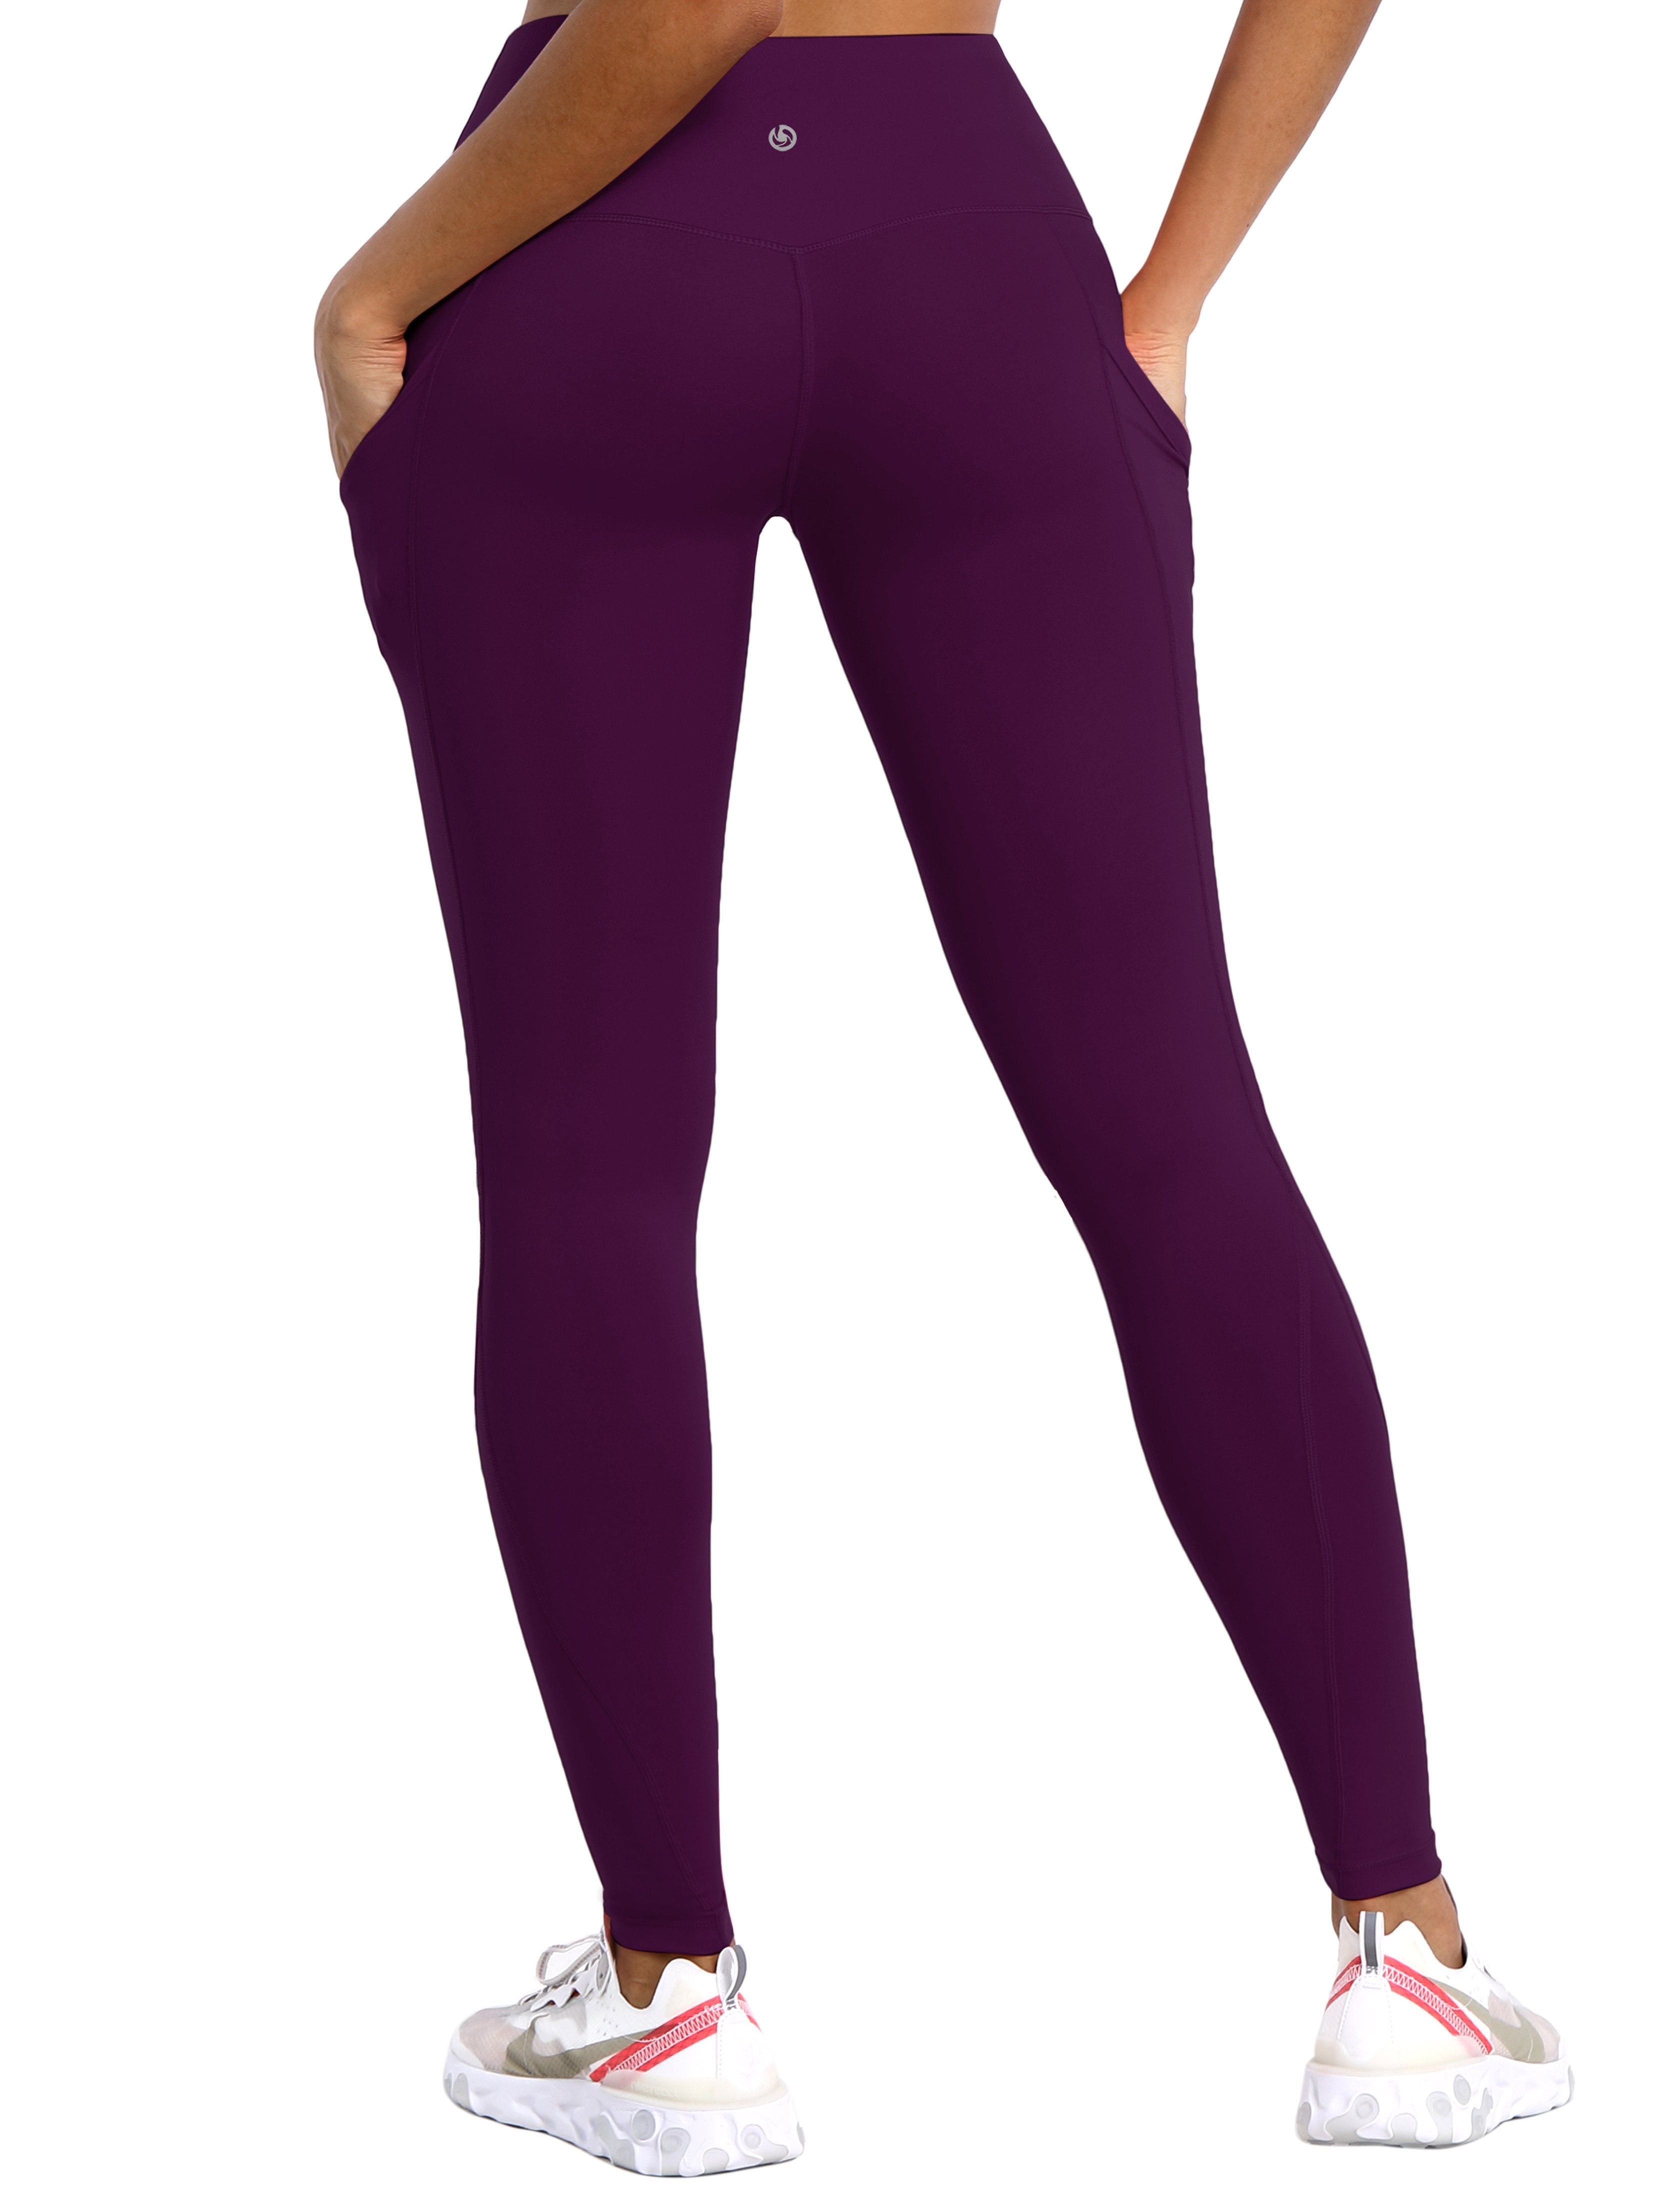 High Waist Side Pockets Gym Pants plum 75% Nylon, 25% Spandex Fabric doesn't attract lint easily 4-way stretch No see-through Moisture-wicking Tummy control Inner pocket